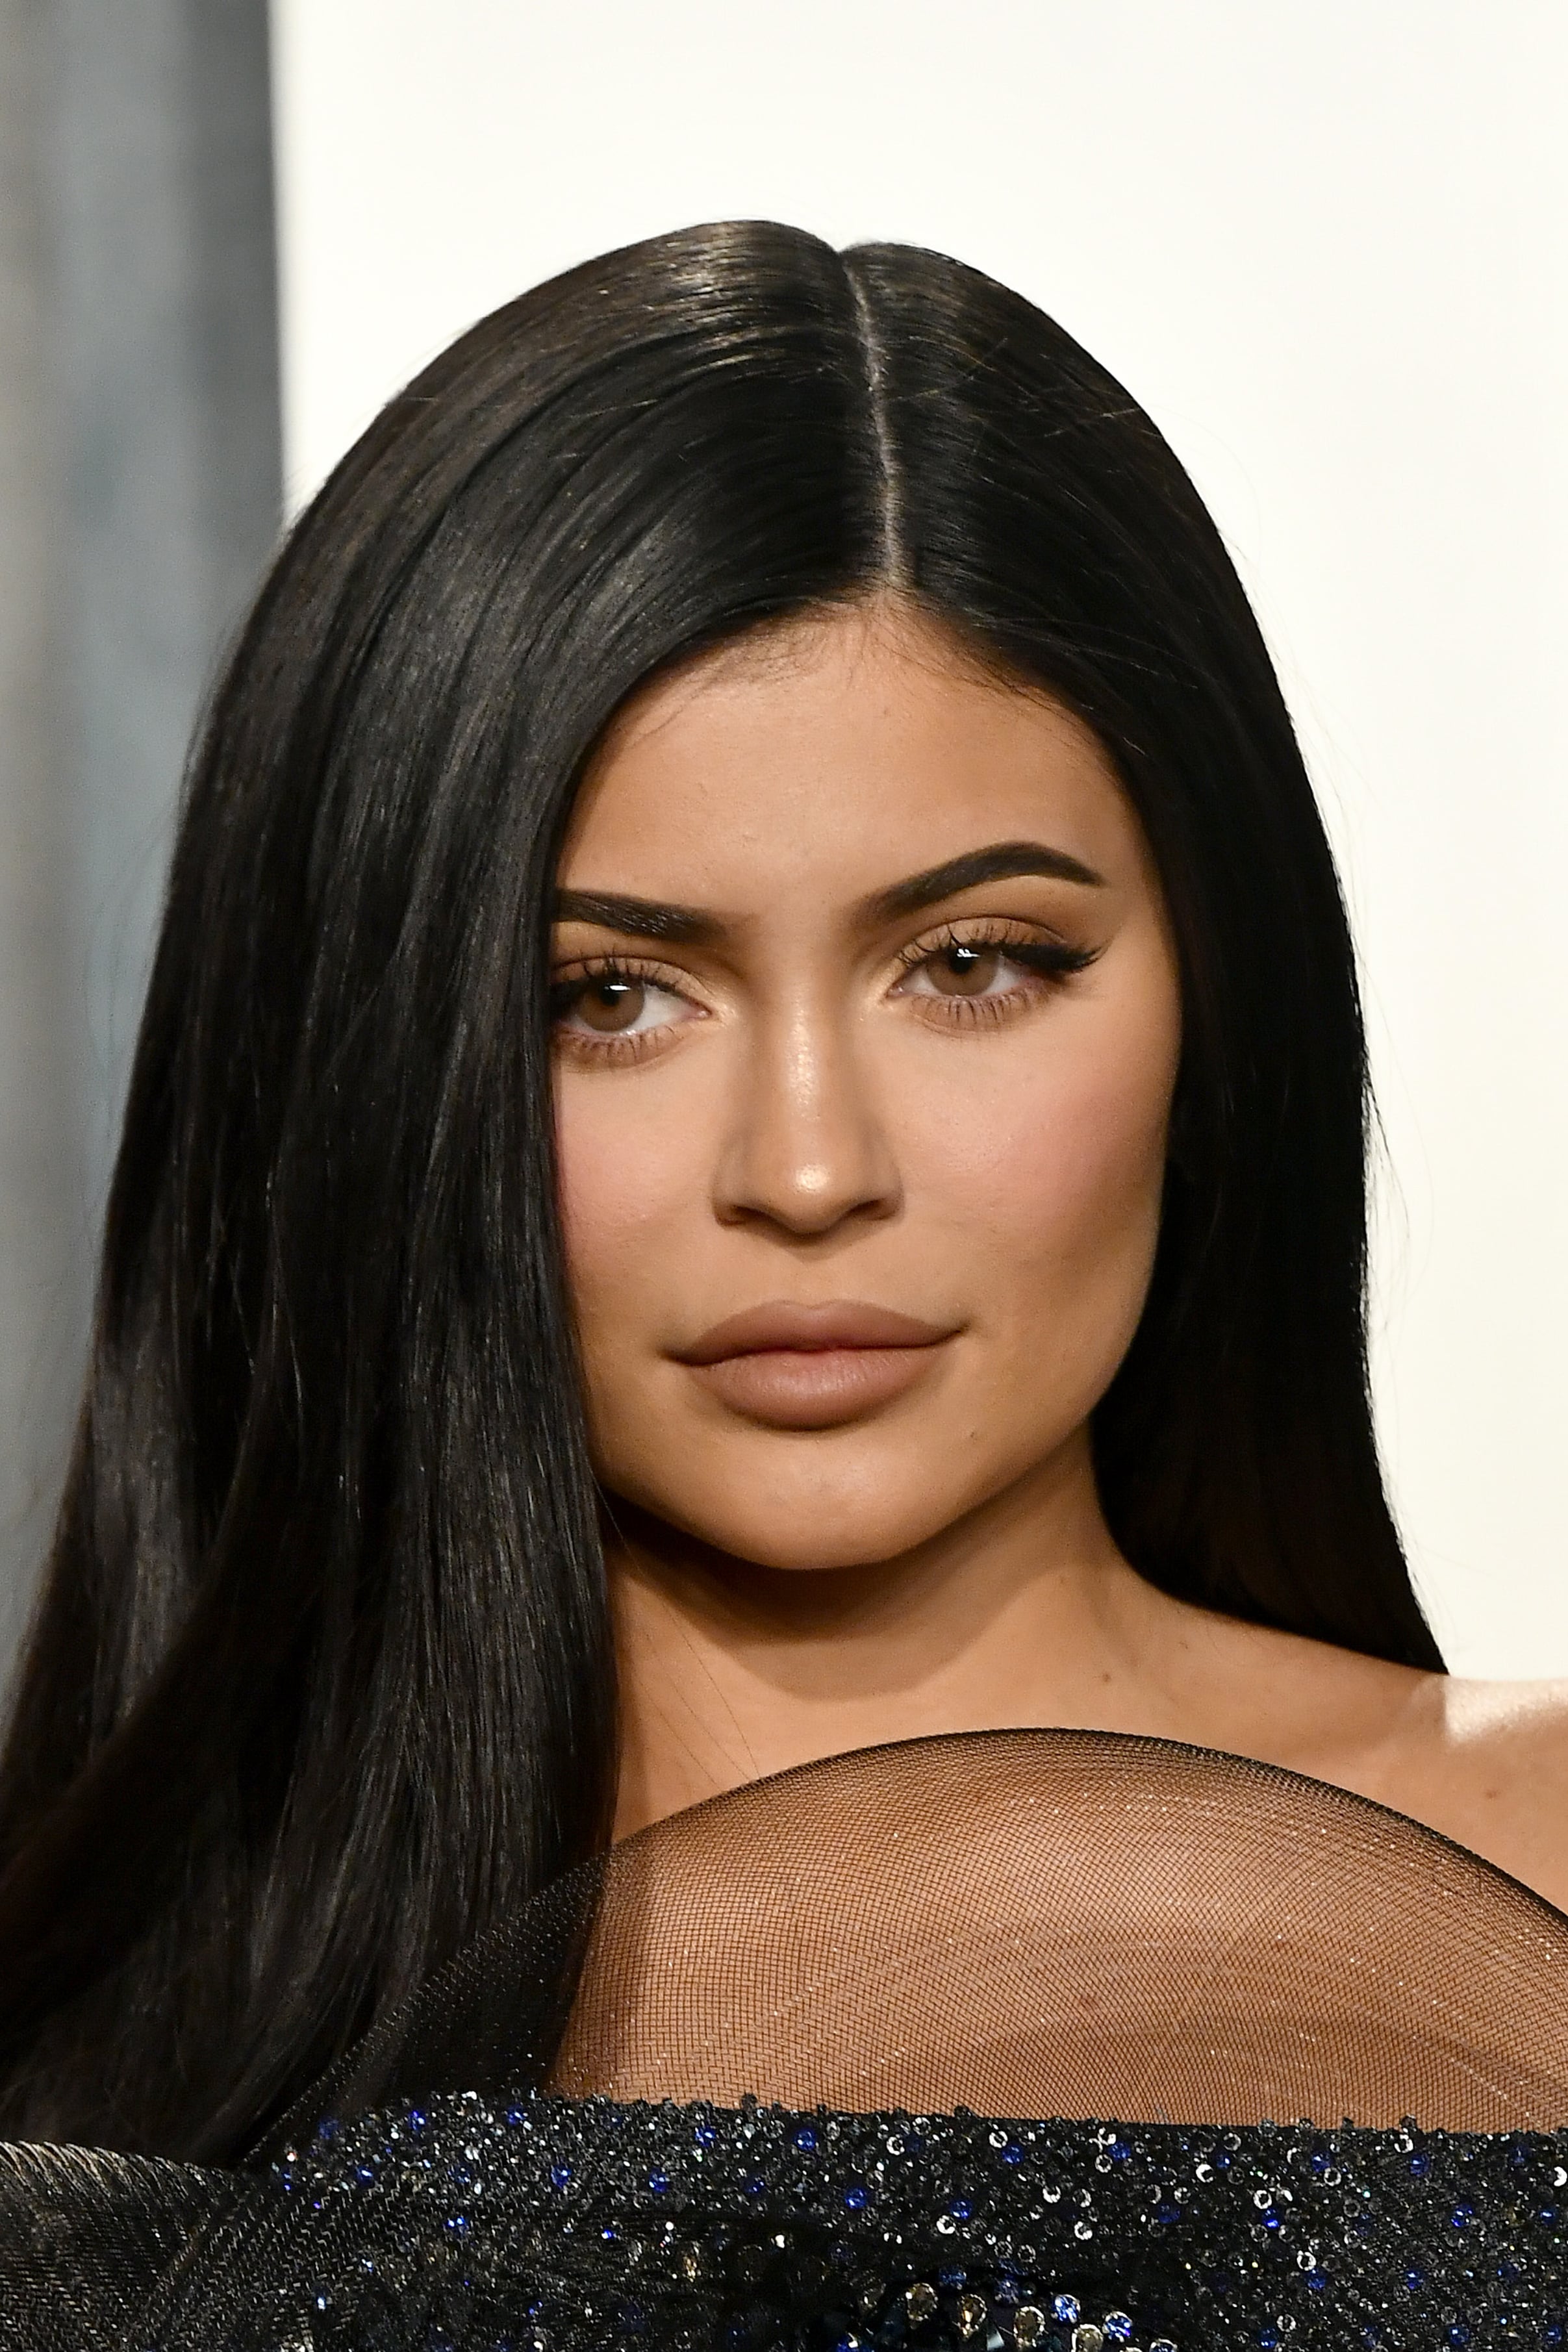 Kylie Jenner's New Hairstyle Is a Bob